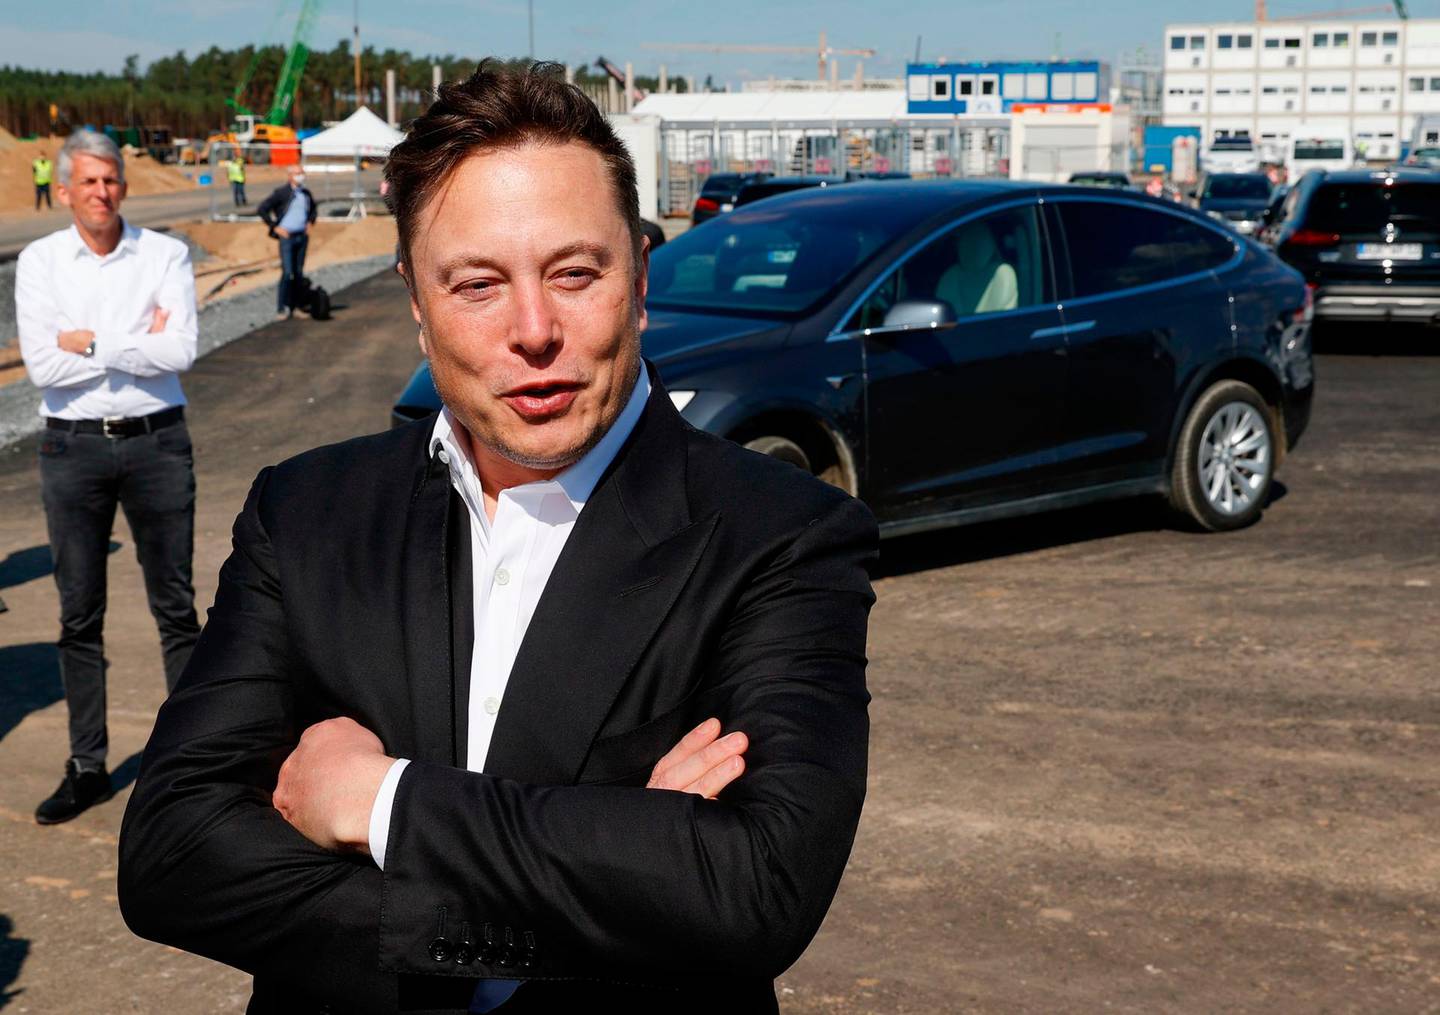 FILES) In this file photo Tesla CEO Elon Musk talks to media as he arrives to visit the construction site of the future US electric car giant Tesla in Gruenheide near Berlin on September 3, 2020. Tesla delivered a record number of cars in 2020, the company said, just narrowly missing its half a million target for the year. The pioneering high-end electric vehicle maker delivered 180,570 cars to customers and produced 179,757 in the fourth quarter of the year, it said in a statement on January 2, 2021.

 / AFP / Odd ANDERSEN
